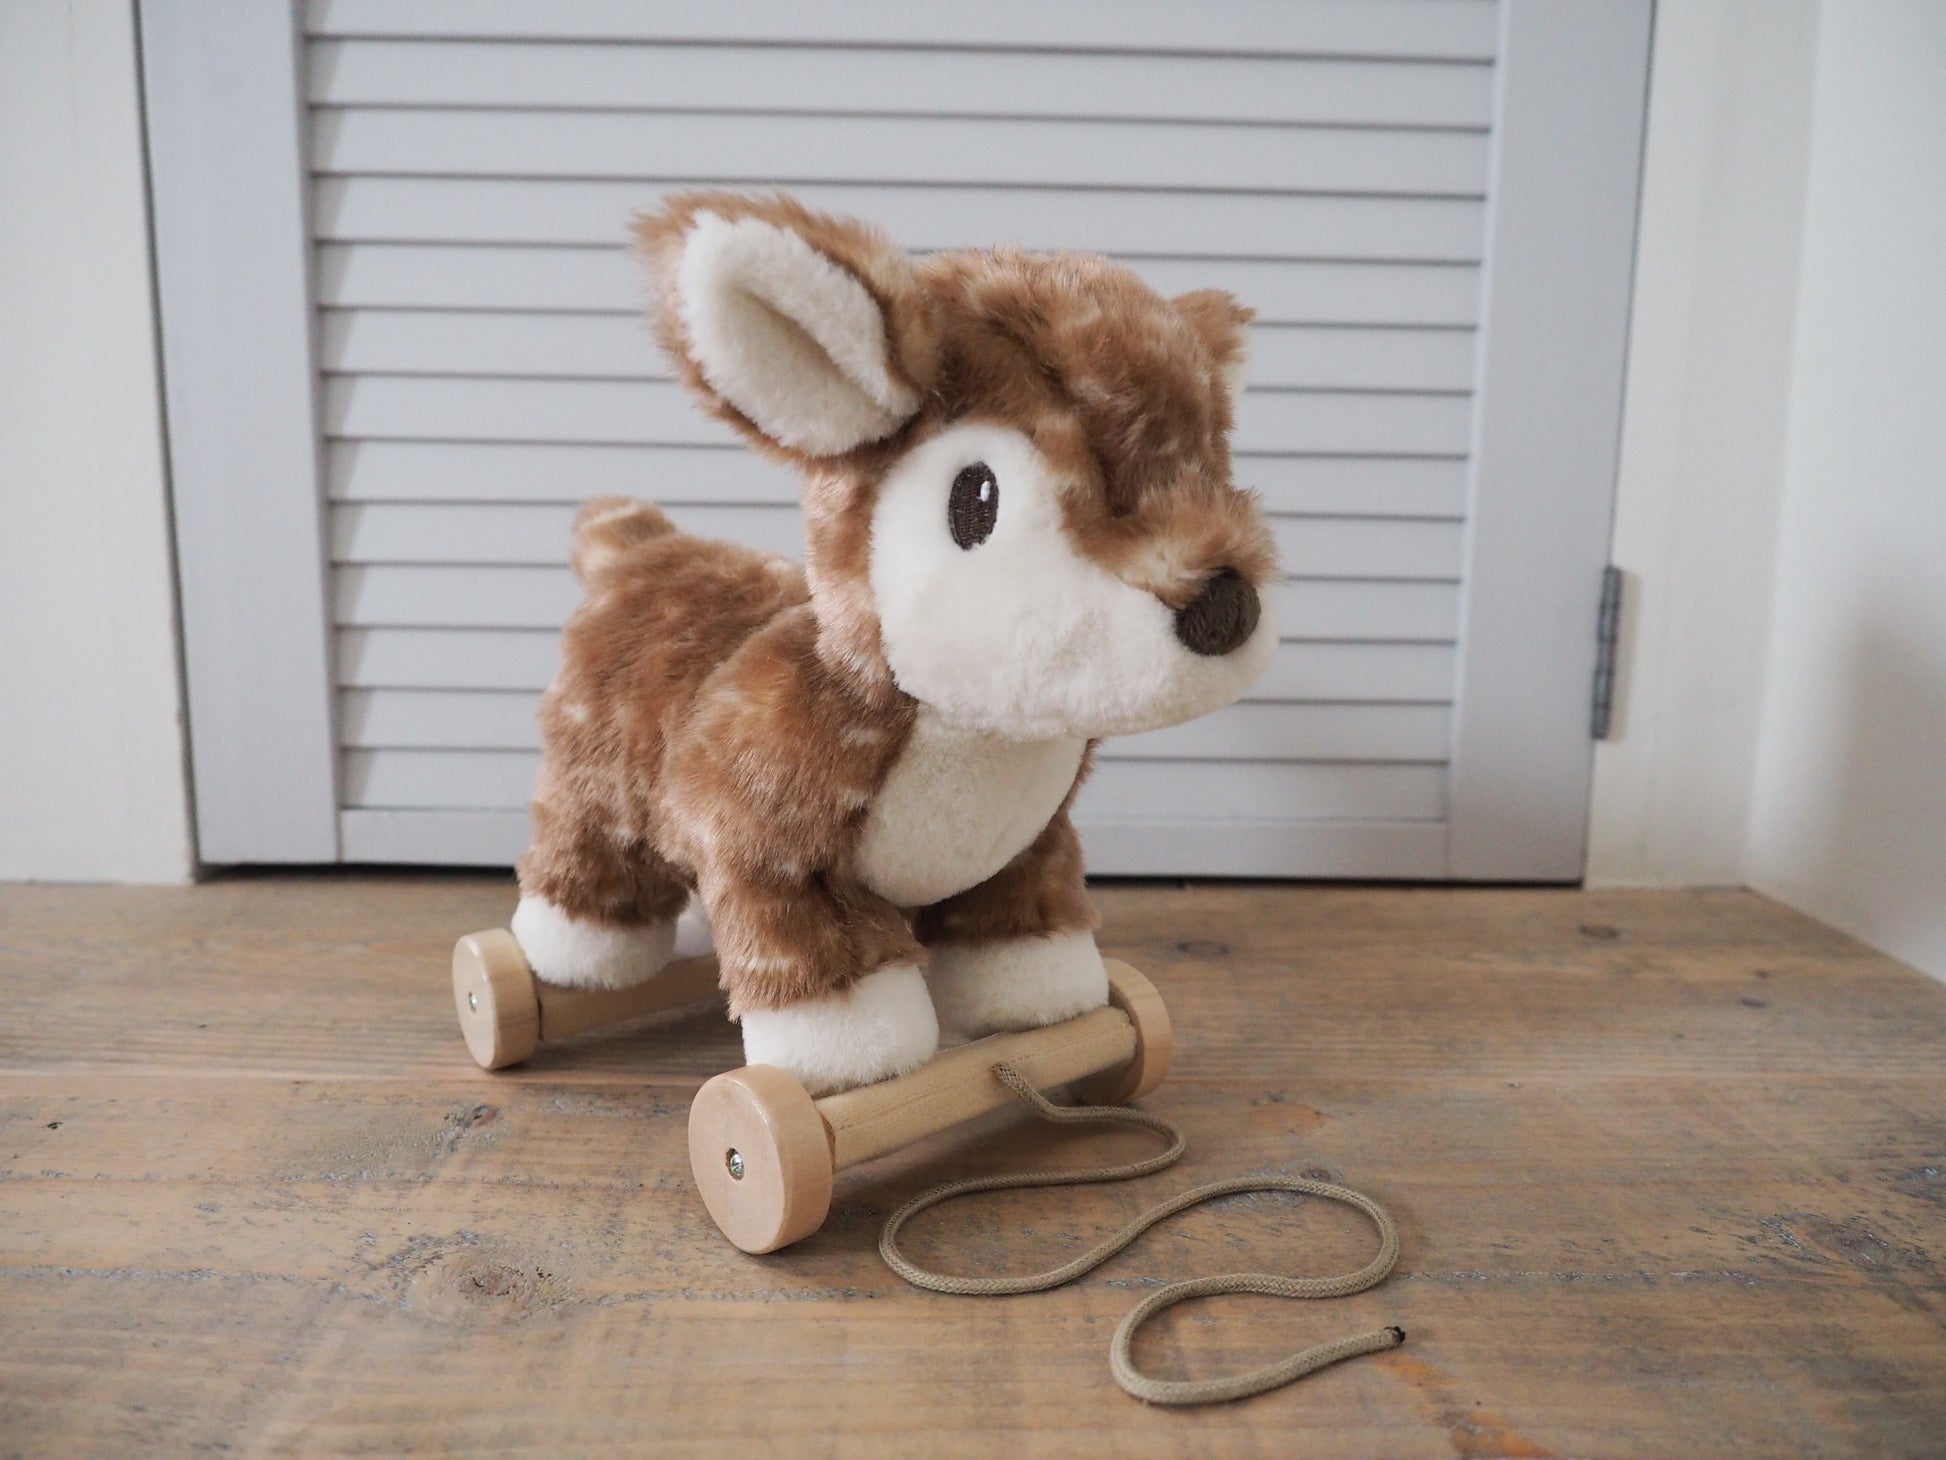 Willow Deer Pull Along Toy-Pull Along Toy-Second Snuggle Preloved